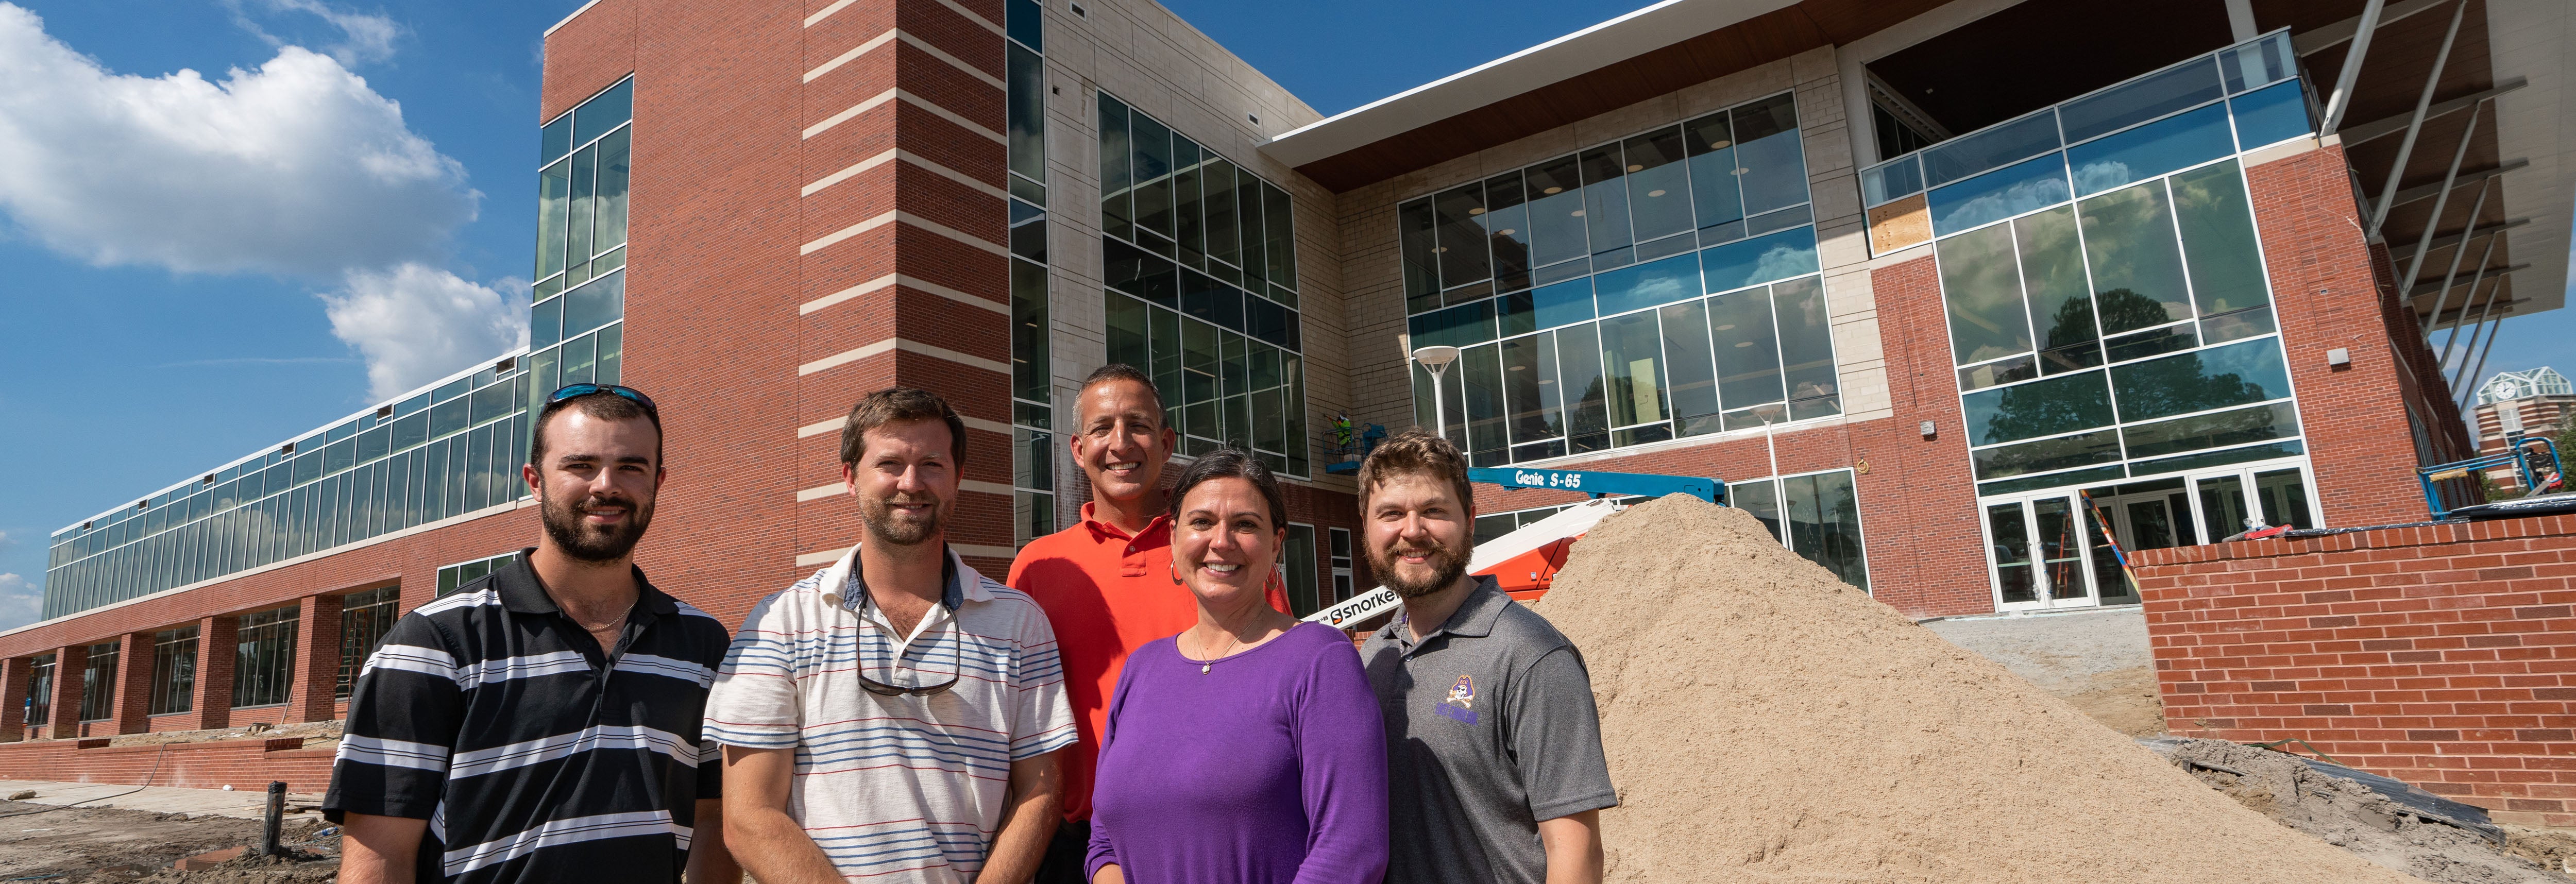 Justin Spears (left), Scott Andrews, Tom Daniel, Jenny Sutton and Chris Denton in front of the new Main Campus Student Center.